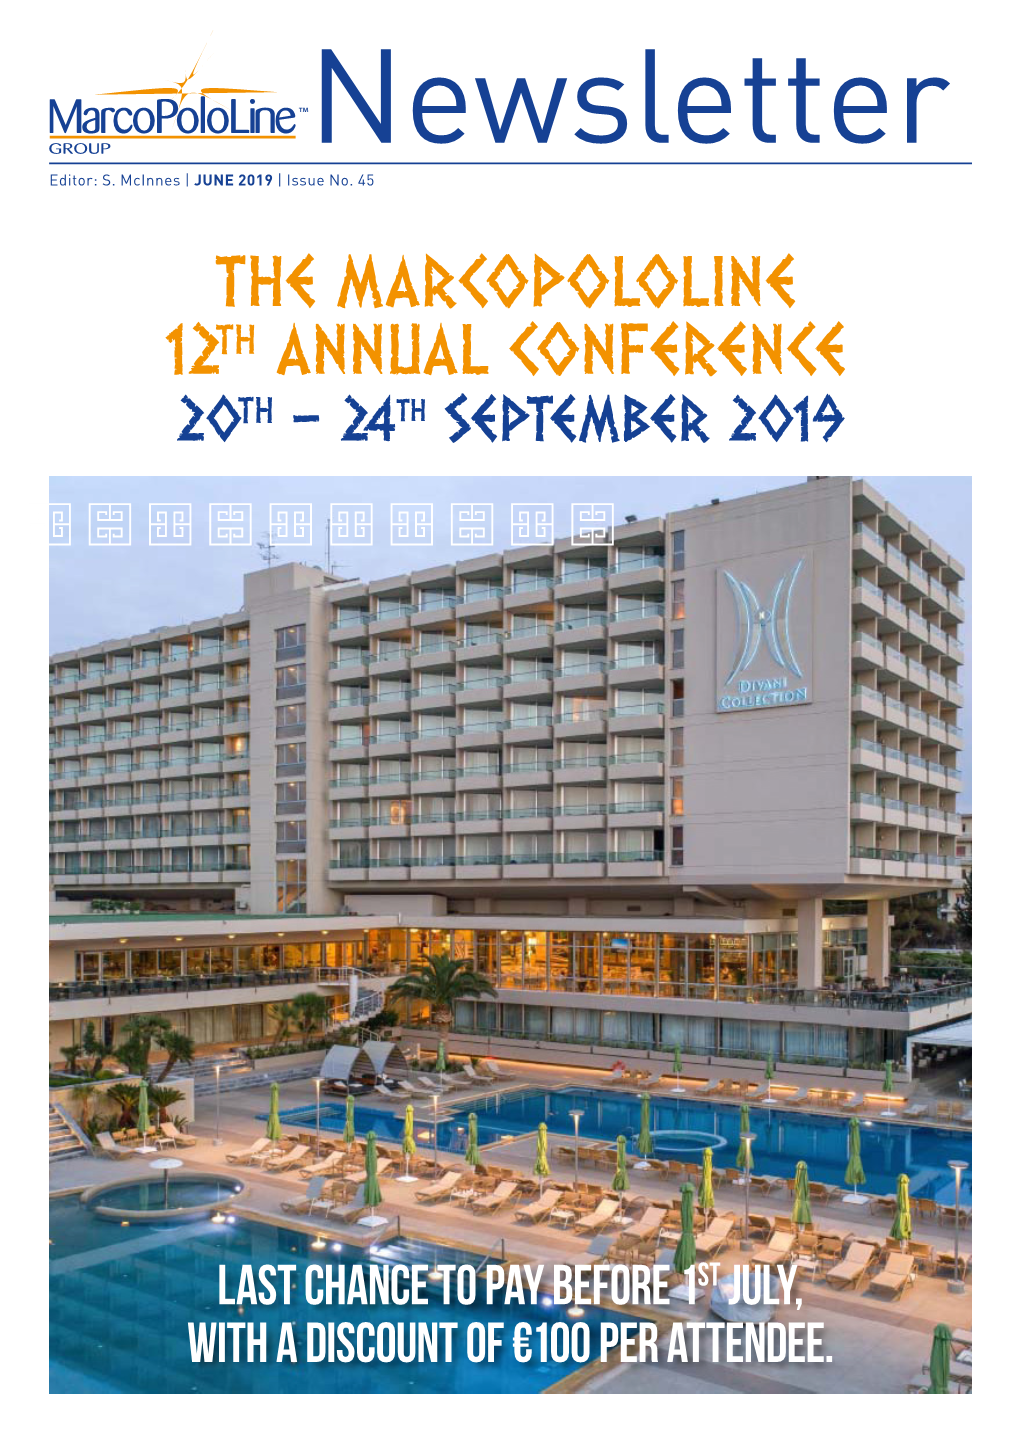 THE MARCOPOLOLINE 12TH ANNUAL CONFERENCE 20TH – 24 Th SEPTEMBER 2019